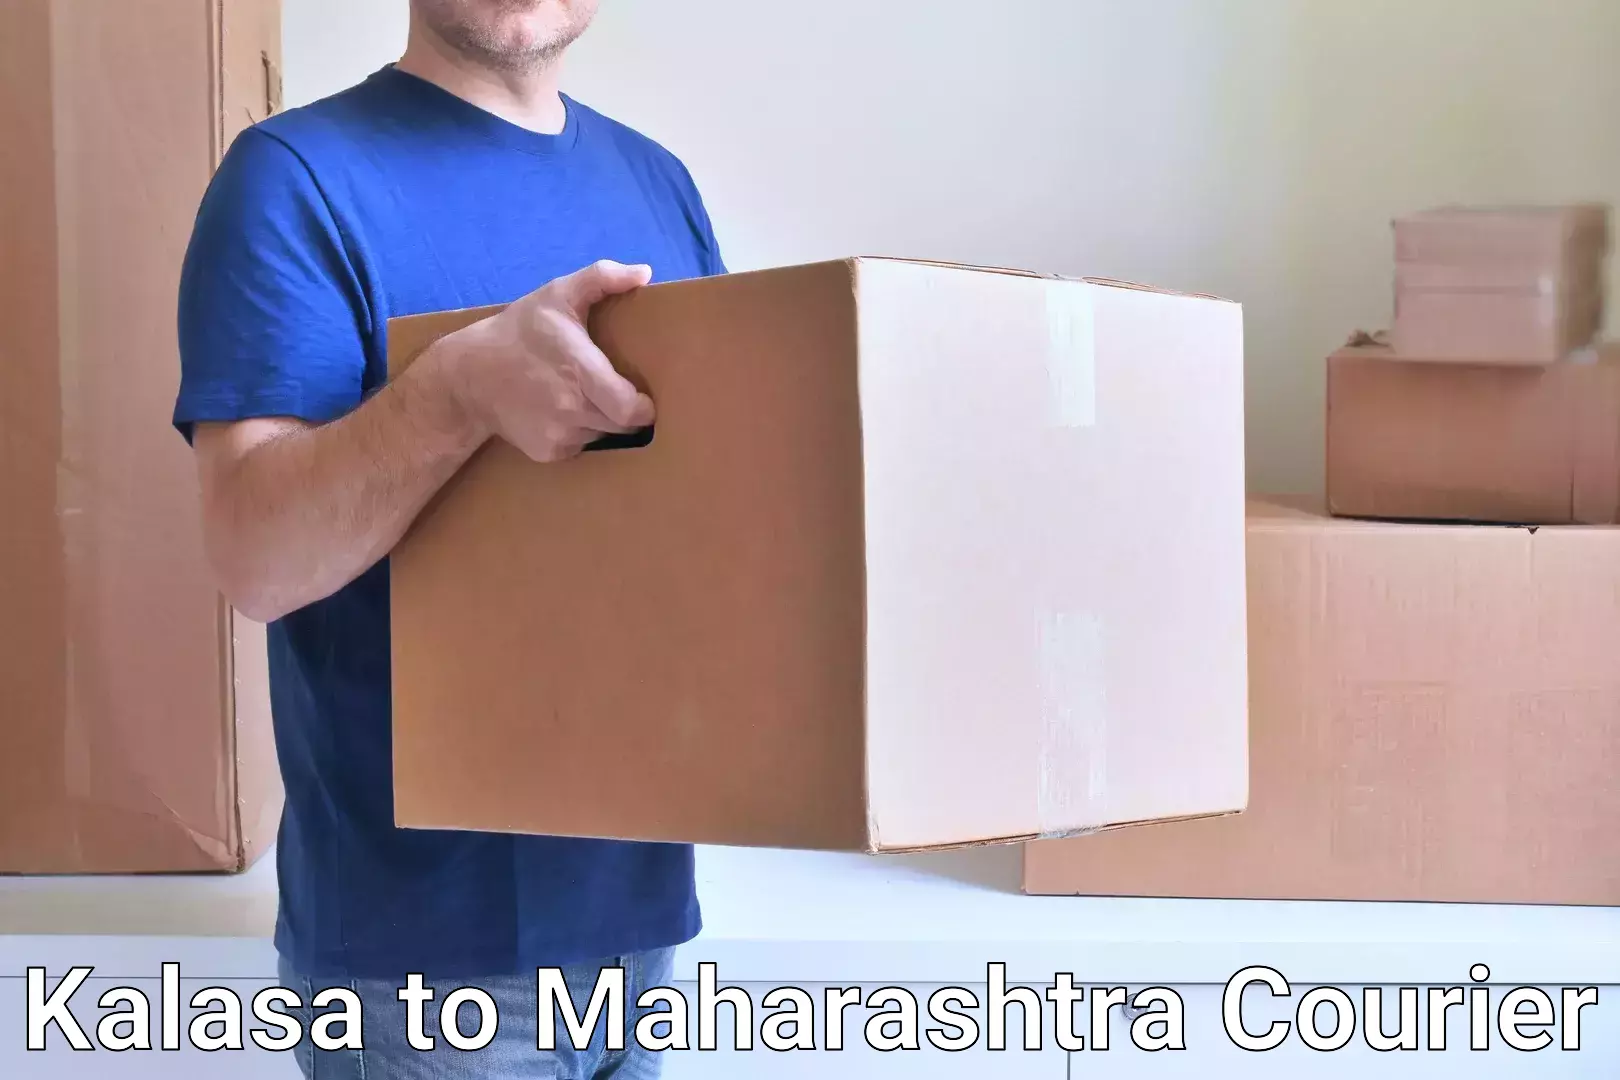 Business delivery service Kalasa to Osmanabad